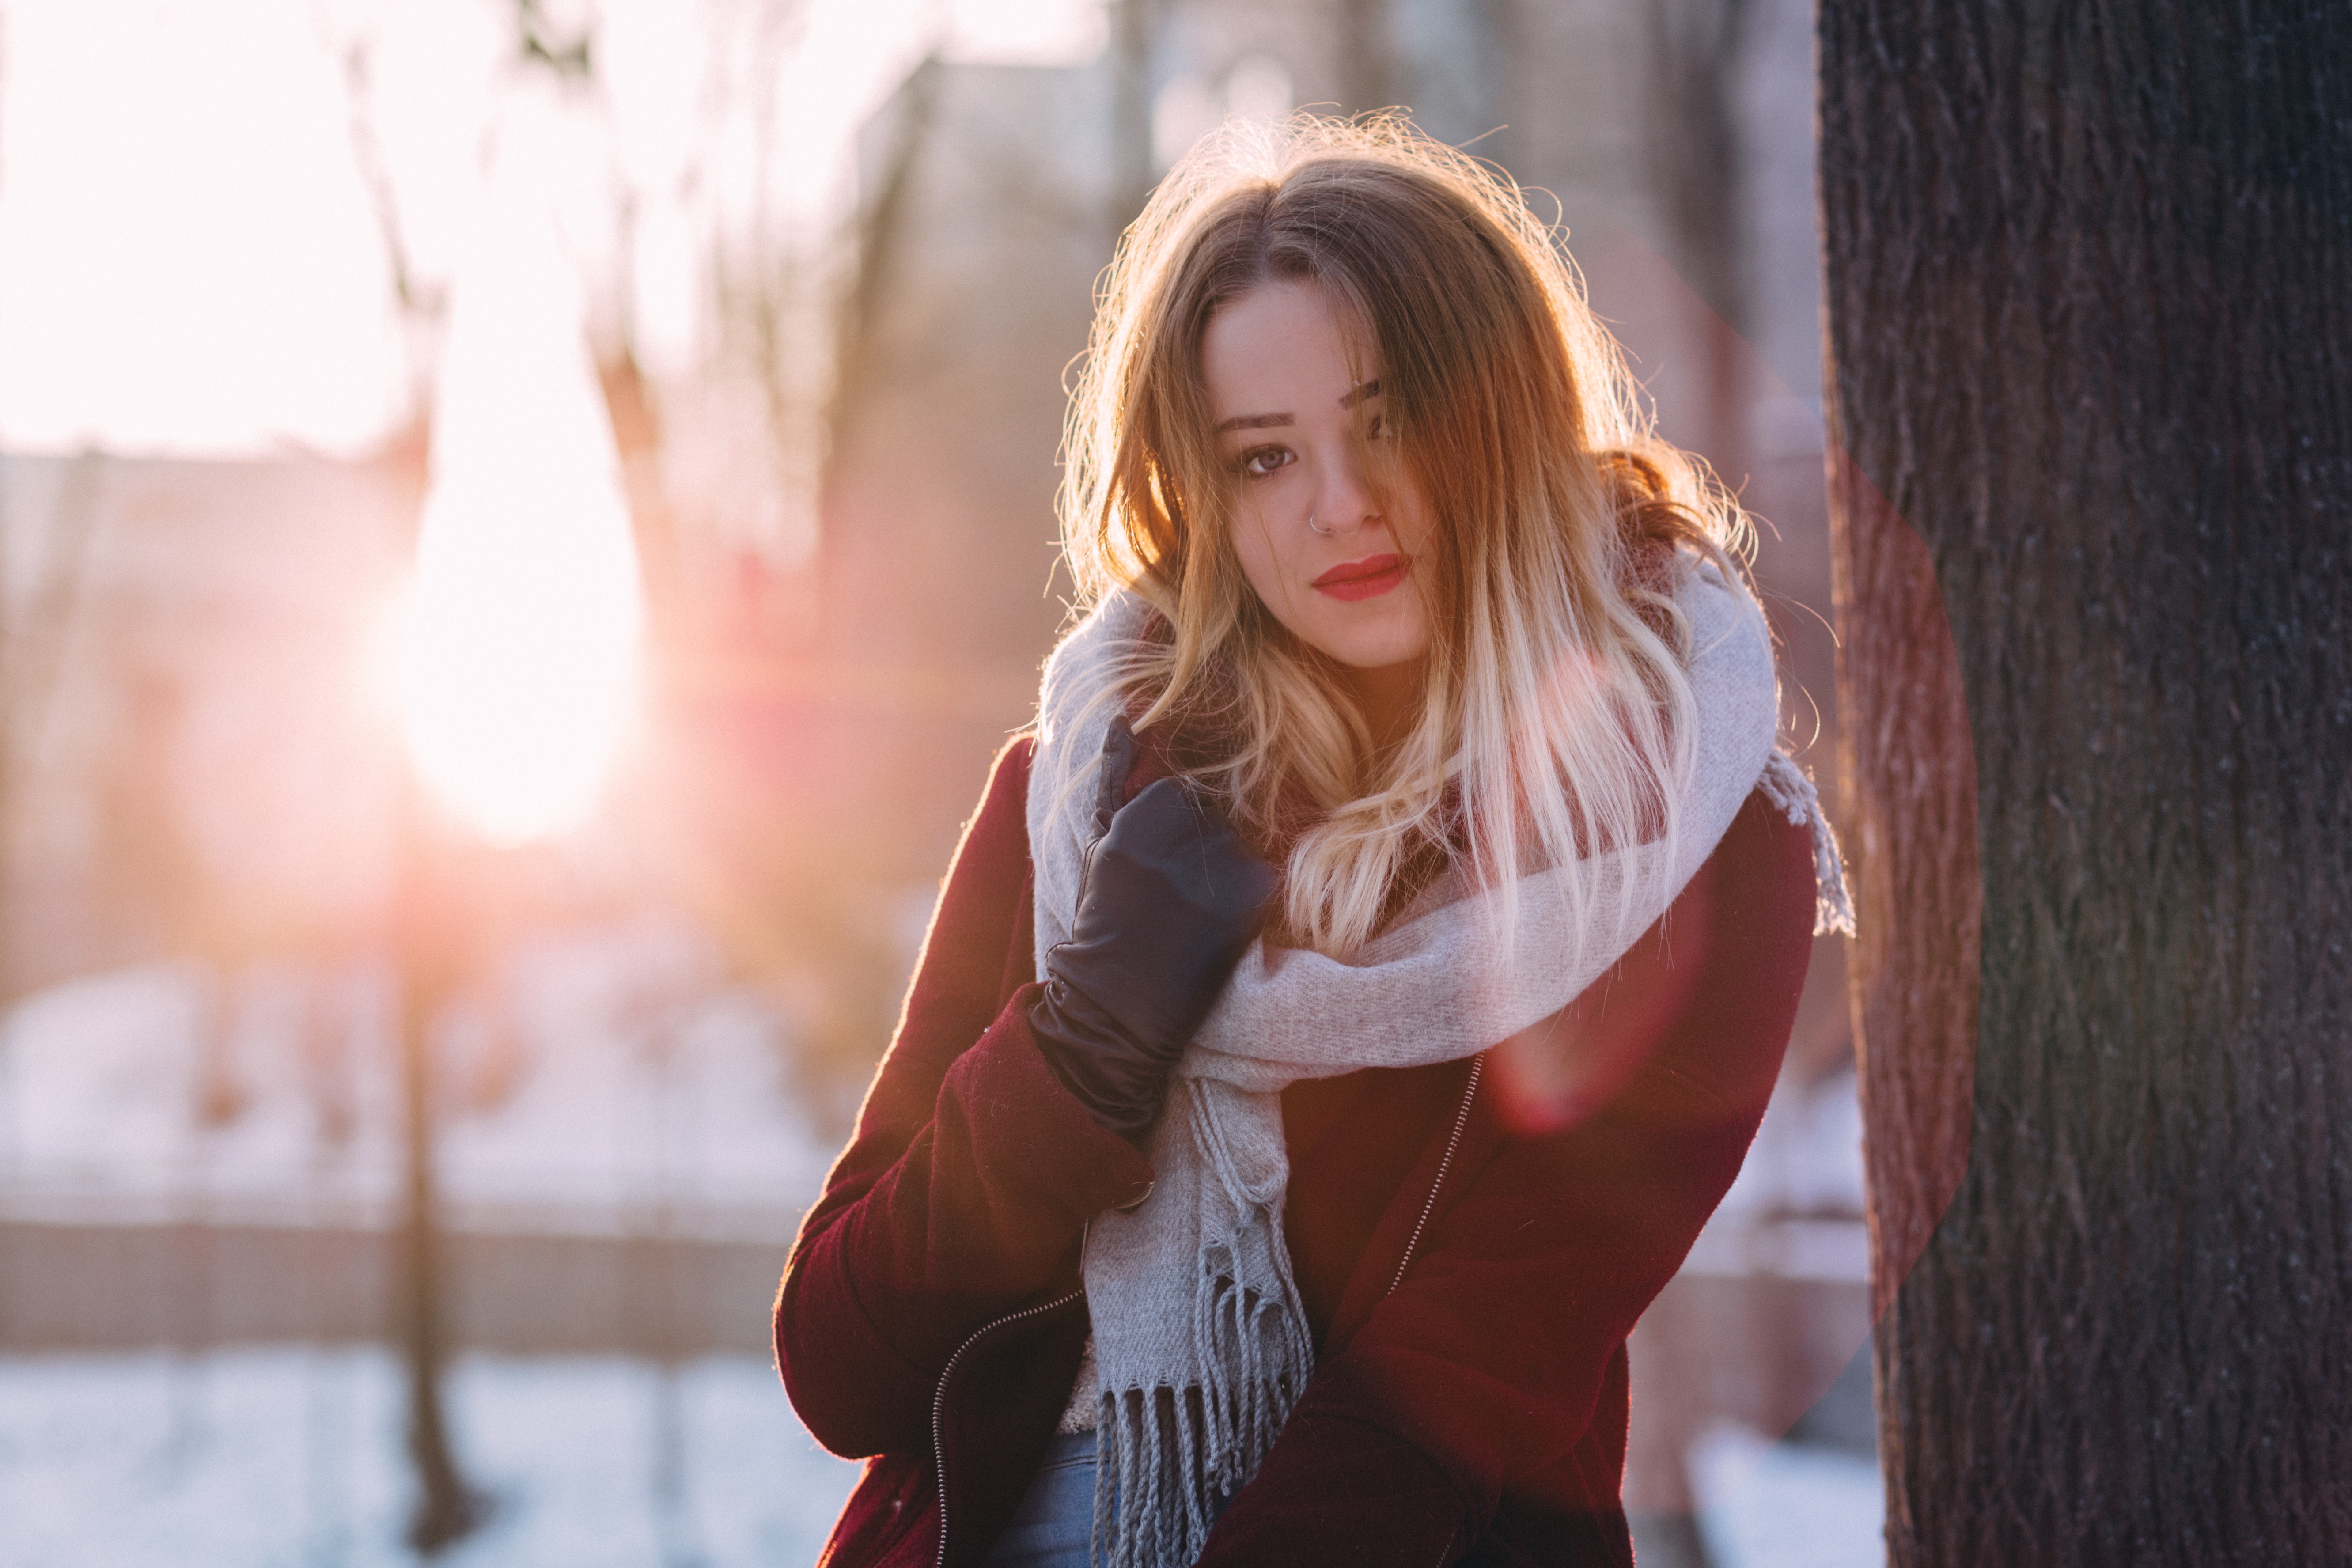 Portrait of young woman during winter photo